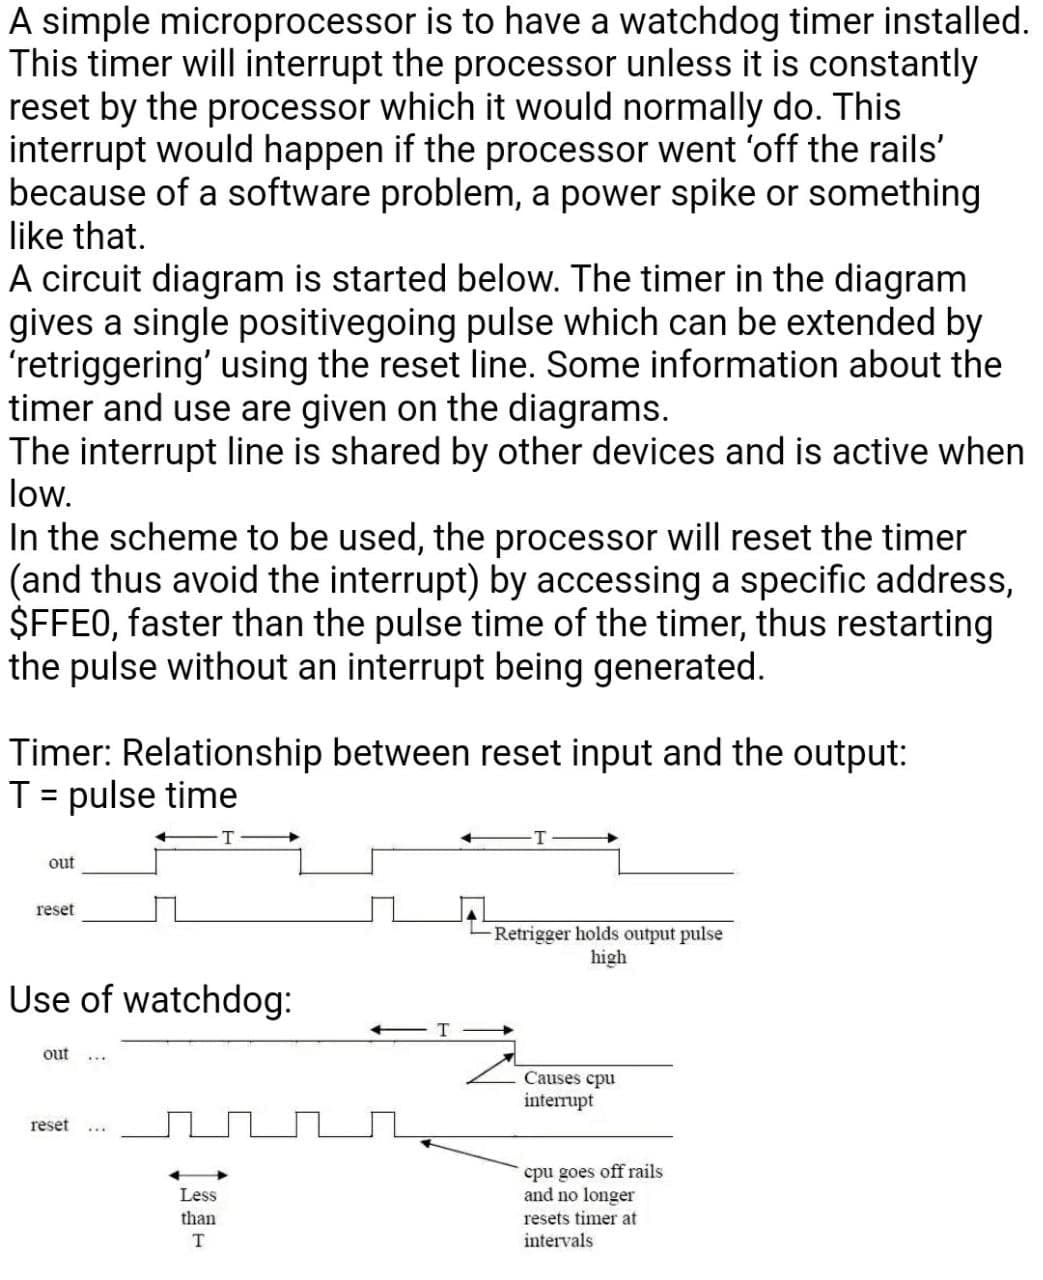 A simple microprocessor is to have a watchdog timer installed.
This timer will interrupt the processor unless it is constantly
reset by the processor which it would normally do. This
interrupt would happen if the processor went 'off the rails'
because of a software problem, a power spike or something
like that.
A circuit diagram is started below. The timer in the diagram
gives a single positivegoing pulse which can be extended by
'retriggering' using the reset line. Some information about the
timer and use are given on the diagrams.
The interrupt line is shared by other devices and is active when
low.
In the scheme to be used, the processor will reset the timer
(and thus avoid the interrupt) by accessing a specific address,
$FFE0, faster than the pulse time of the timer, thus restarting
the pulse without an interrupt being generated.
Timer: Relationship between reset input and the output:
T= pulse time
out
reset
-Retrigger holds output pulse
high
Use of watchdog:
out
Causes cpu
interrupt
reset
cpu goes off rails
and no longer
Less
than
resets timer at
intervals
